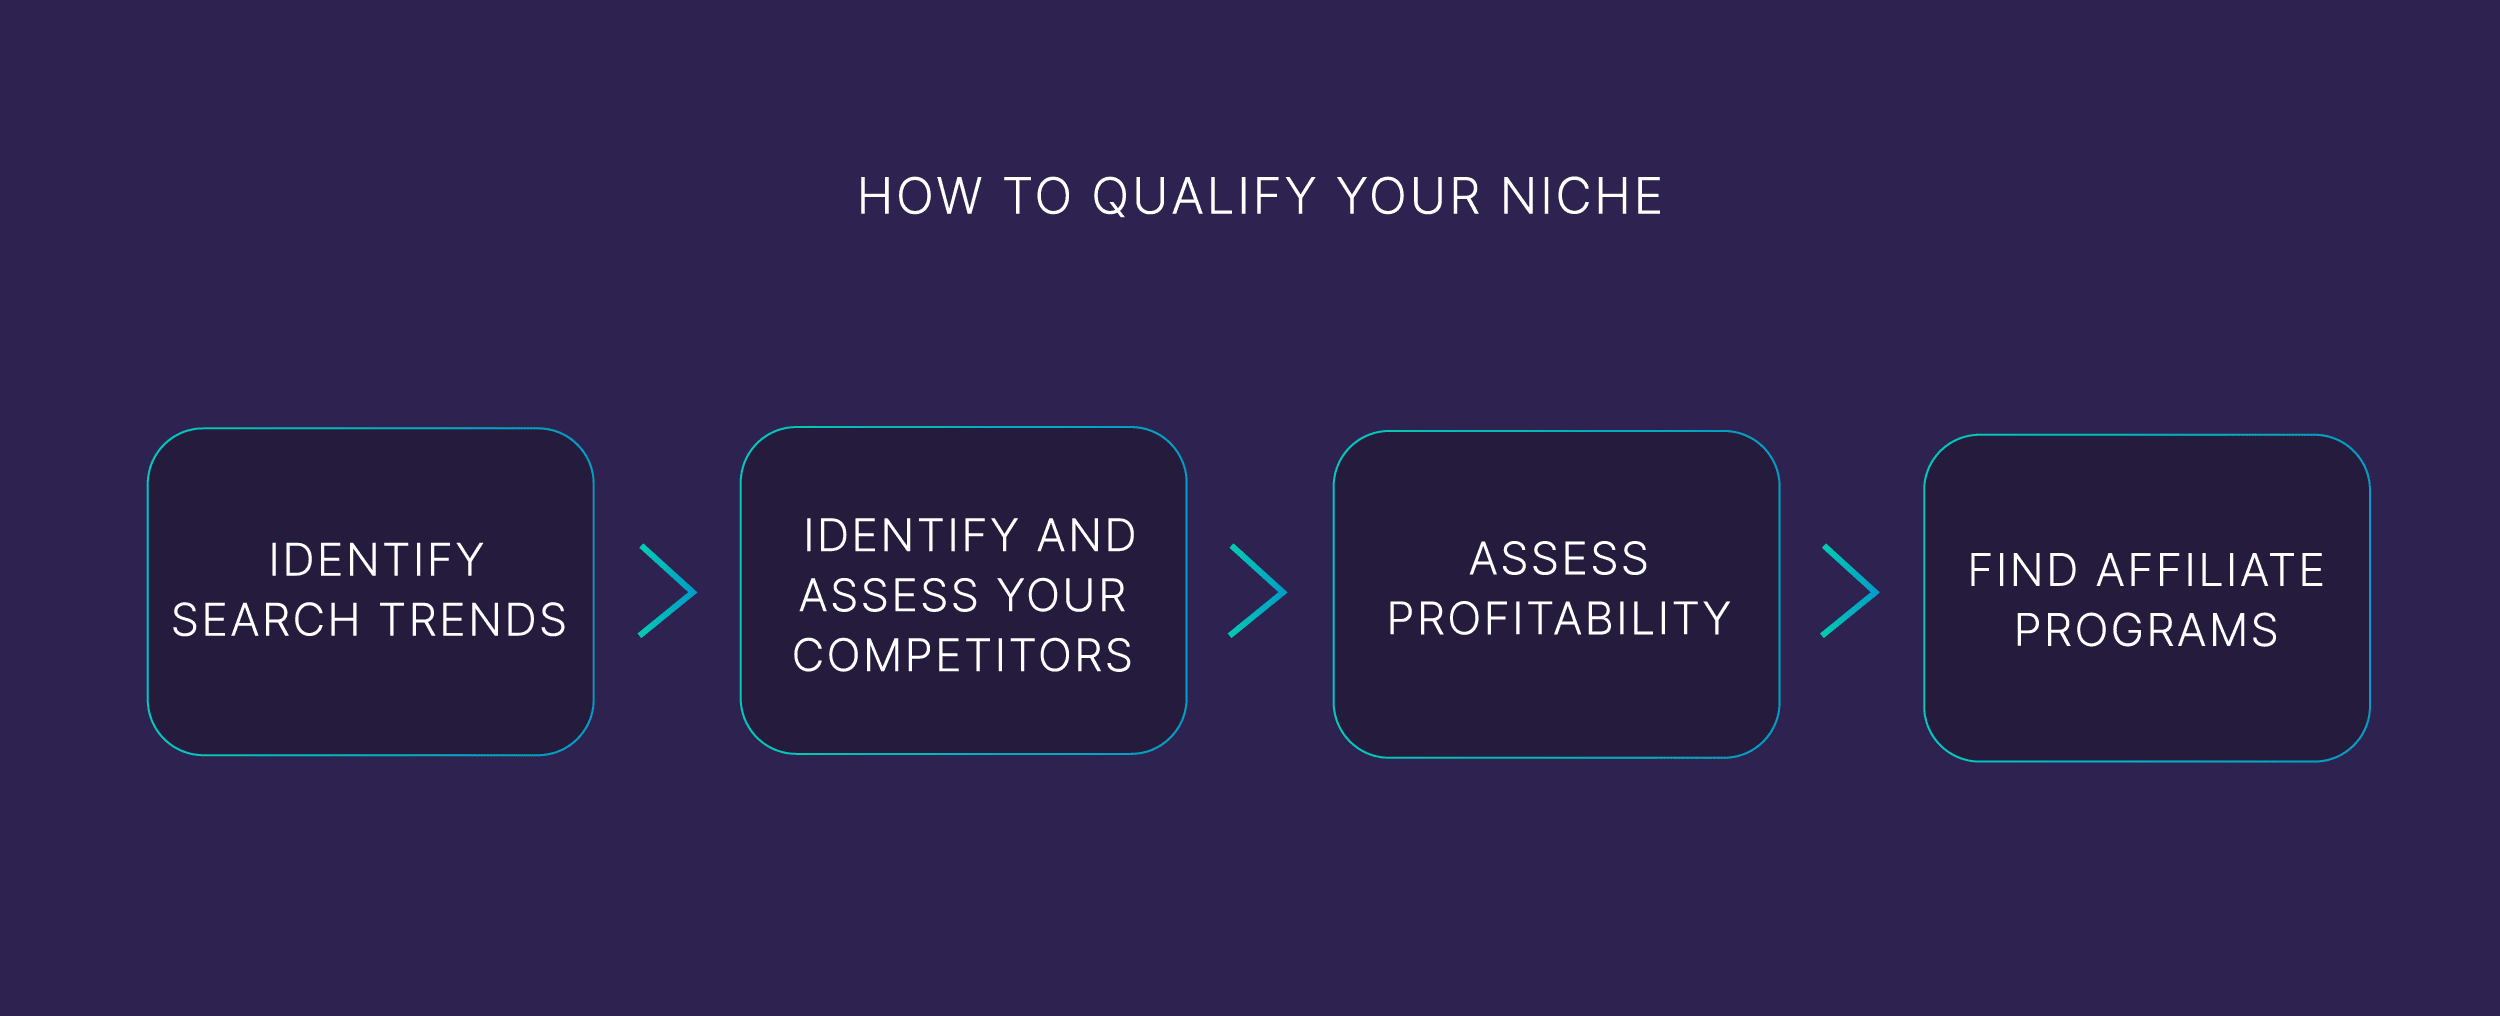 How to qualify your niche